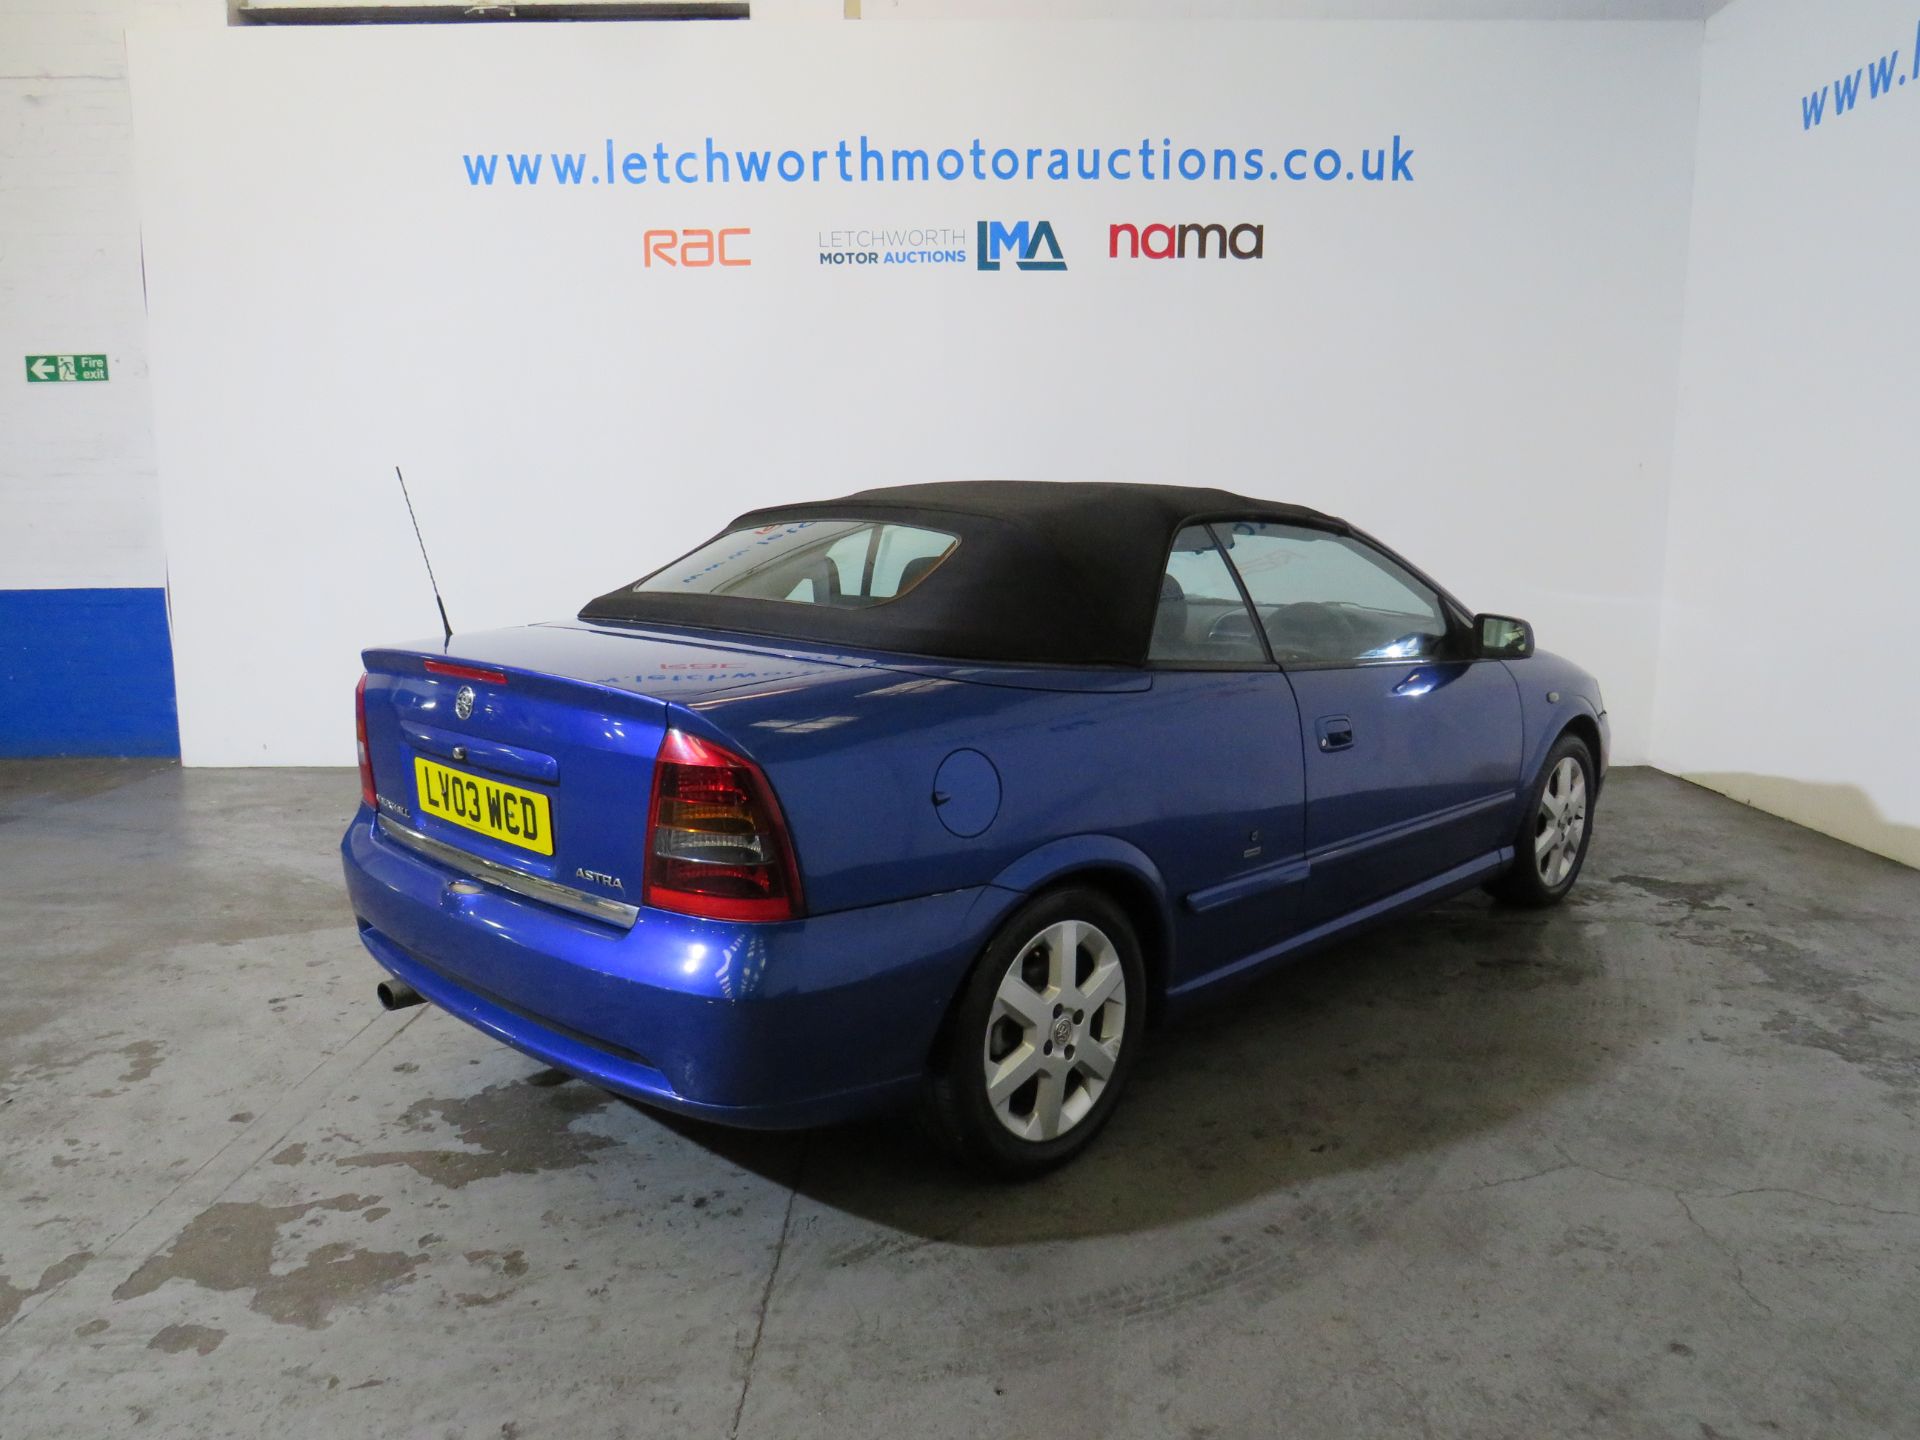 2003 Vauxhall Astra Coupe Convertible Manual - 1598cc - Image 11 of 15